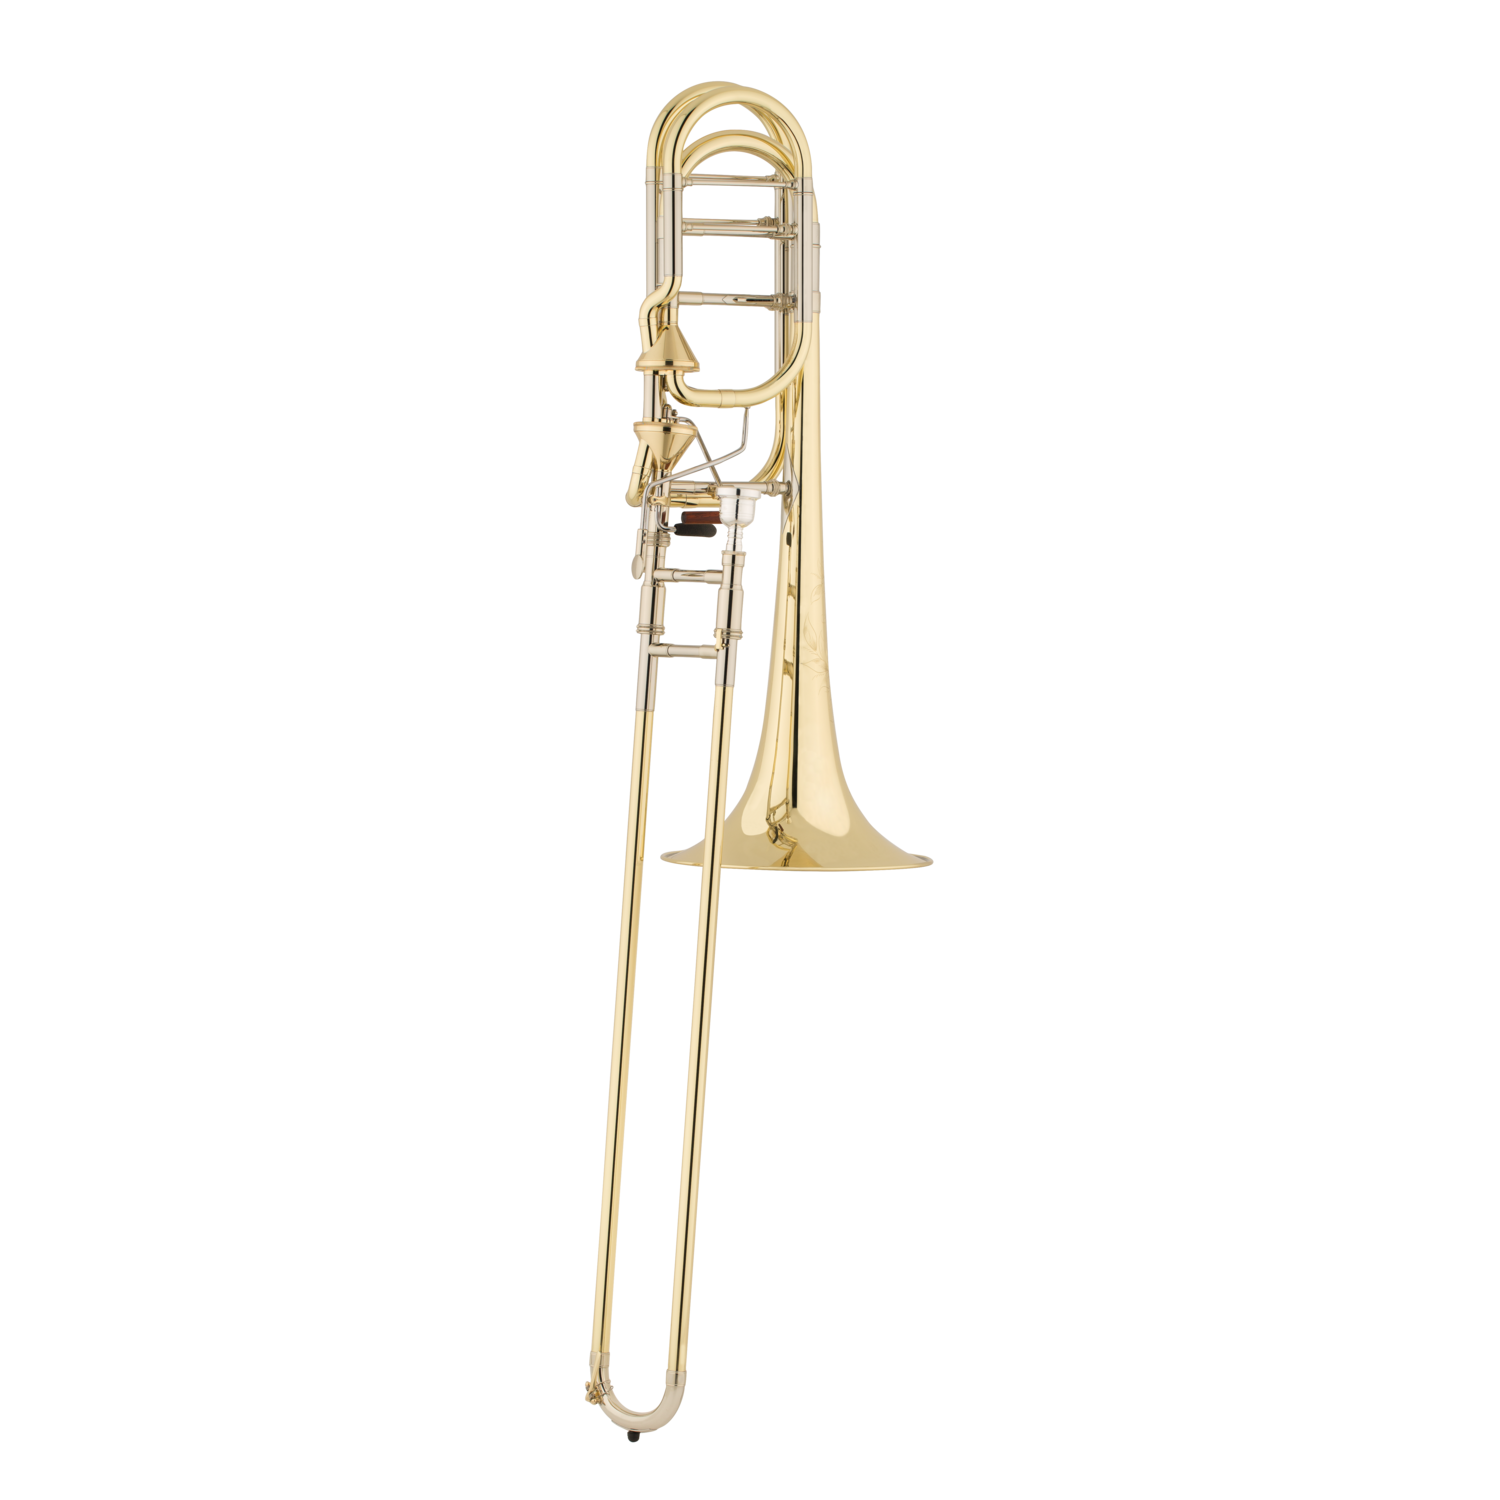 S.E. Shires - George Curran Artist Model Bass Trombone with Axial Flow F/Gb Attachment-Trombone-S.E. Shires-Music Elements